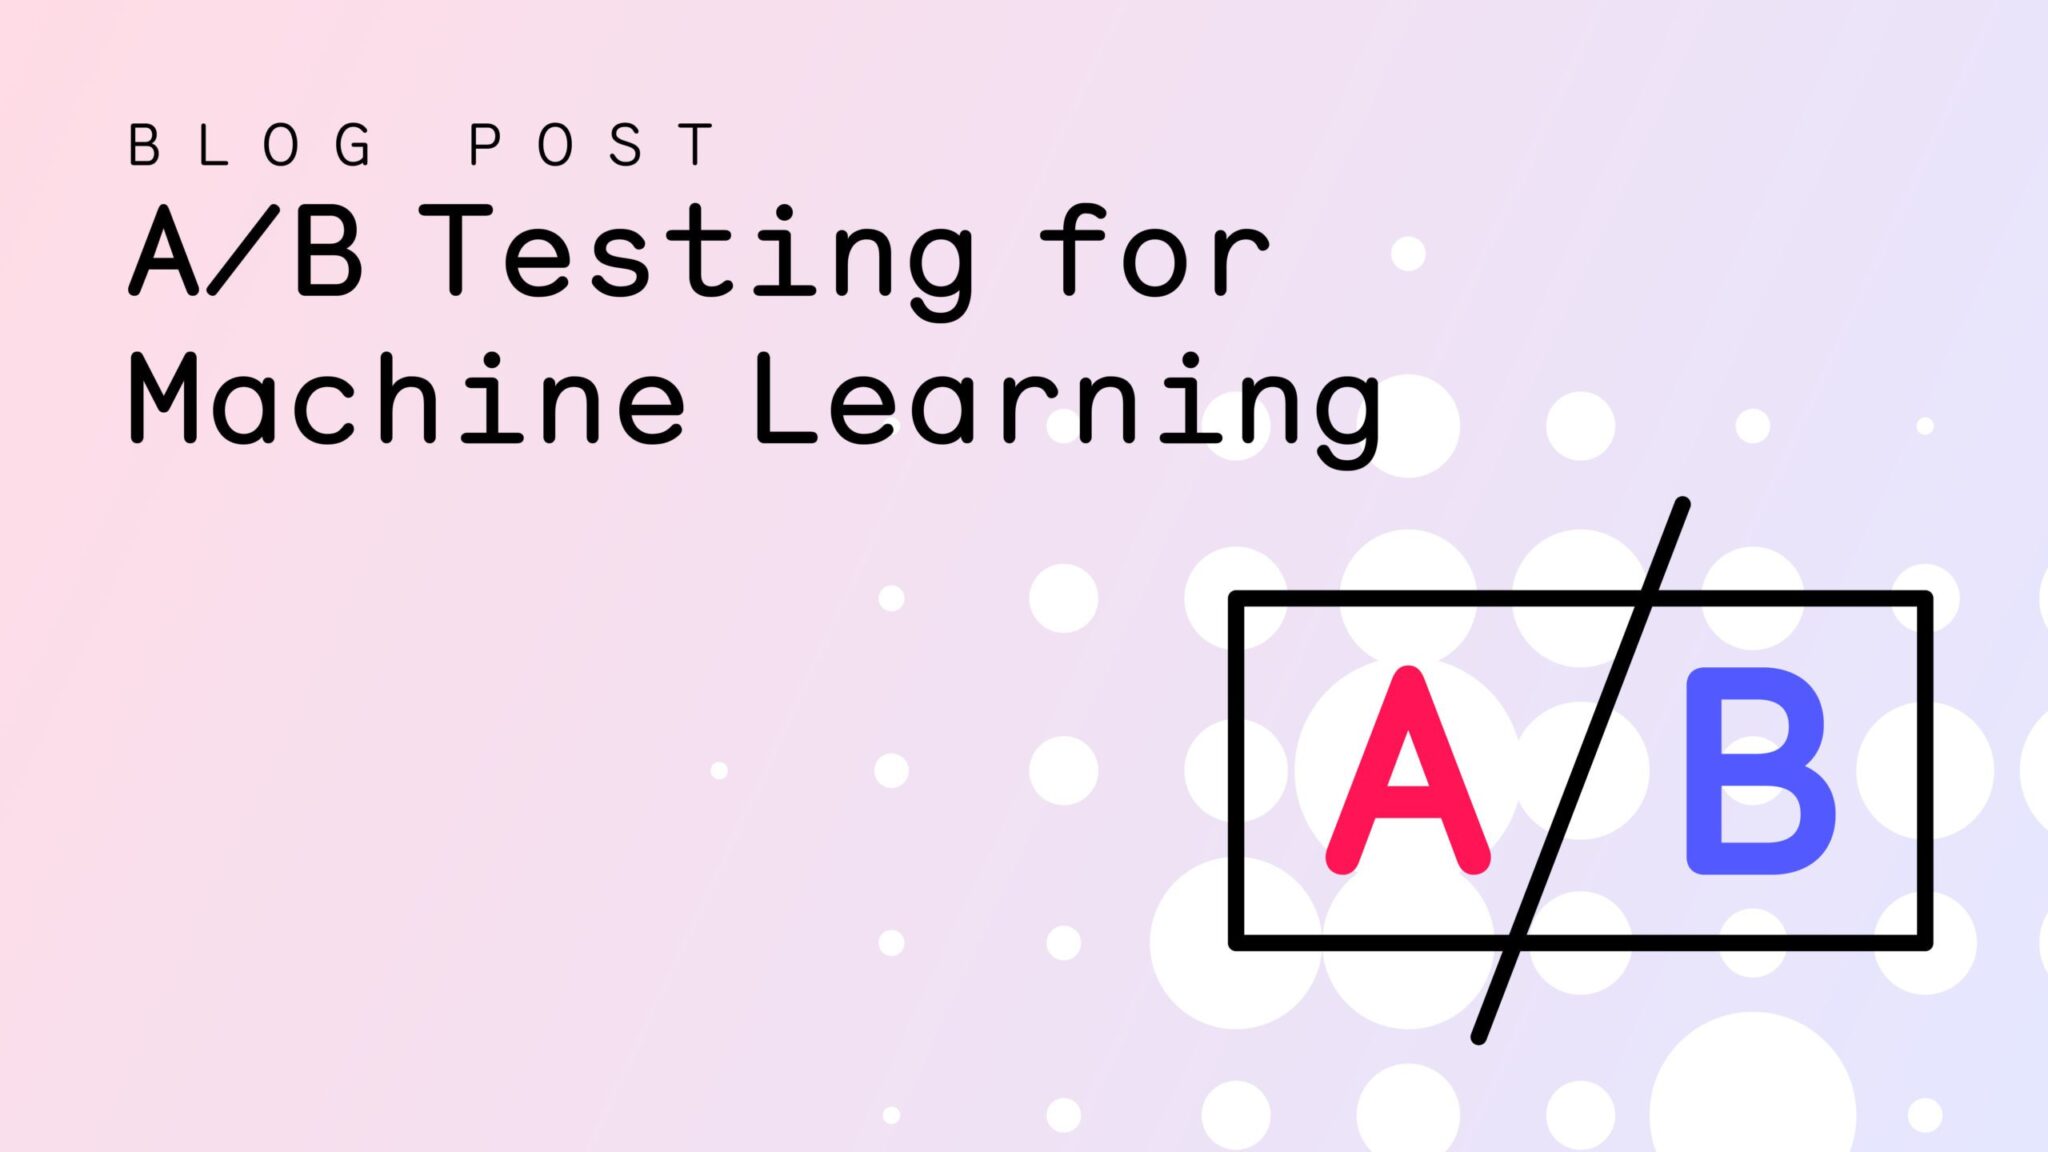 A/B Testing for Machine Learning